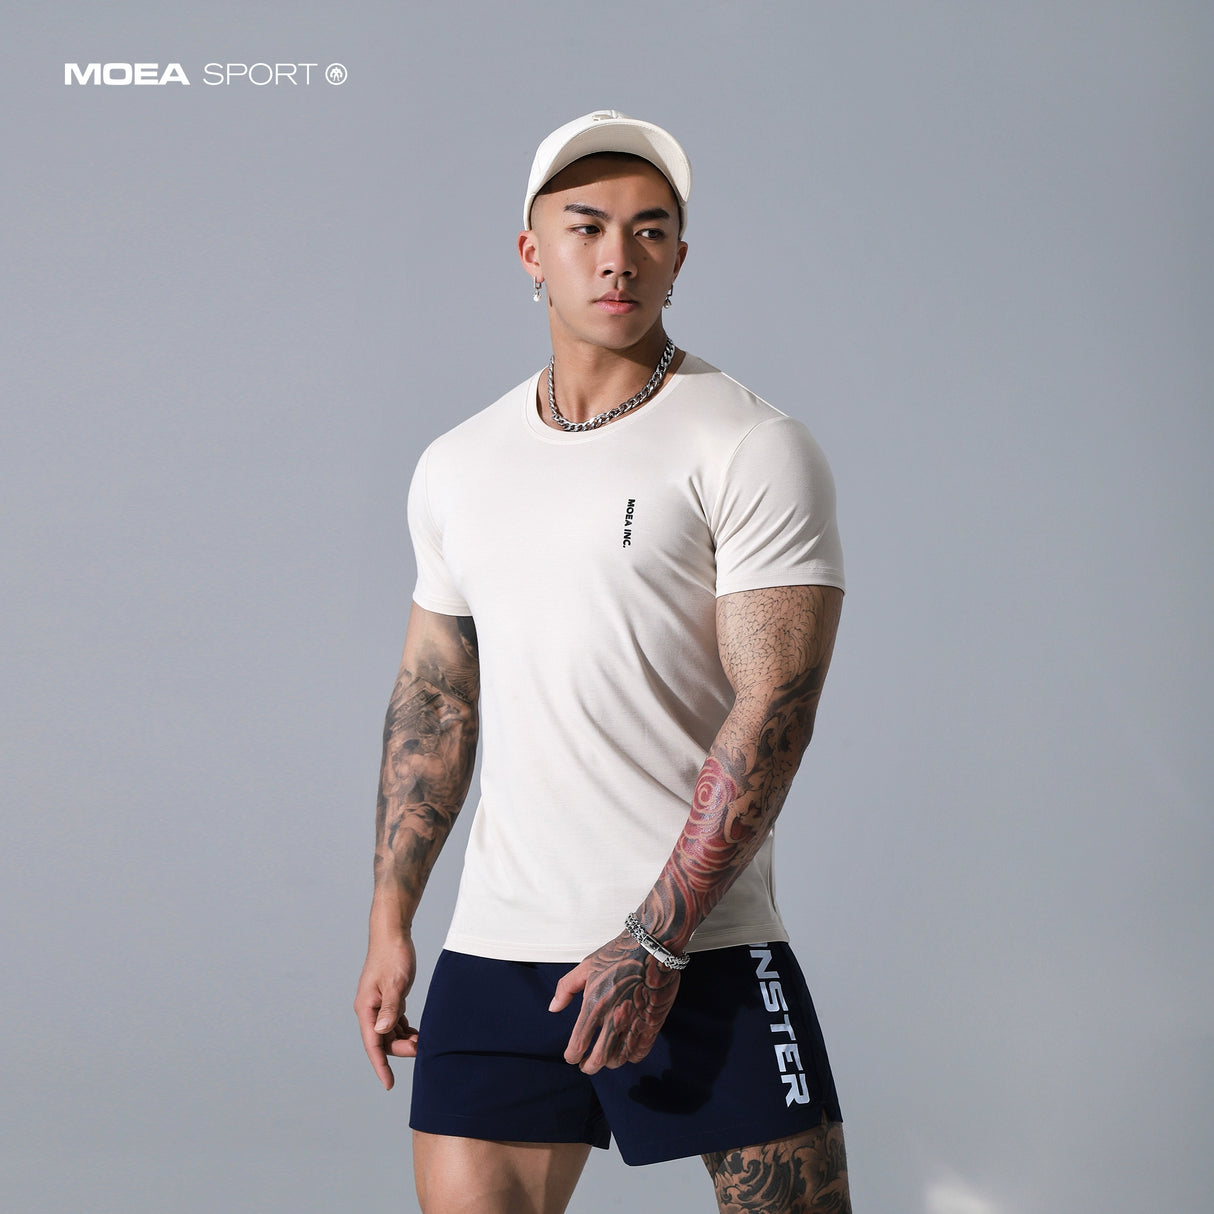 Mercerized short sleeve t-shirt men's ice summer clothes solid color base layer